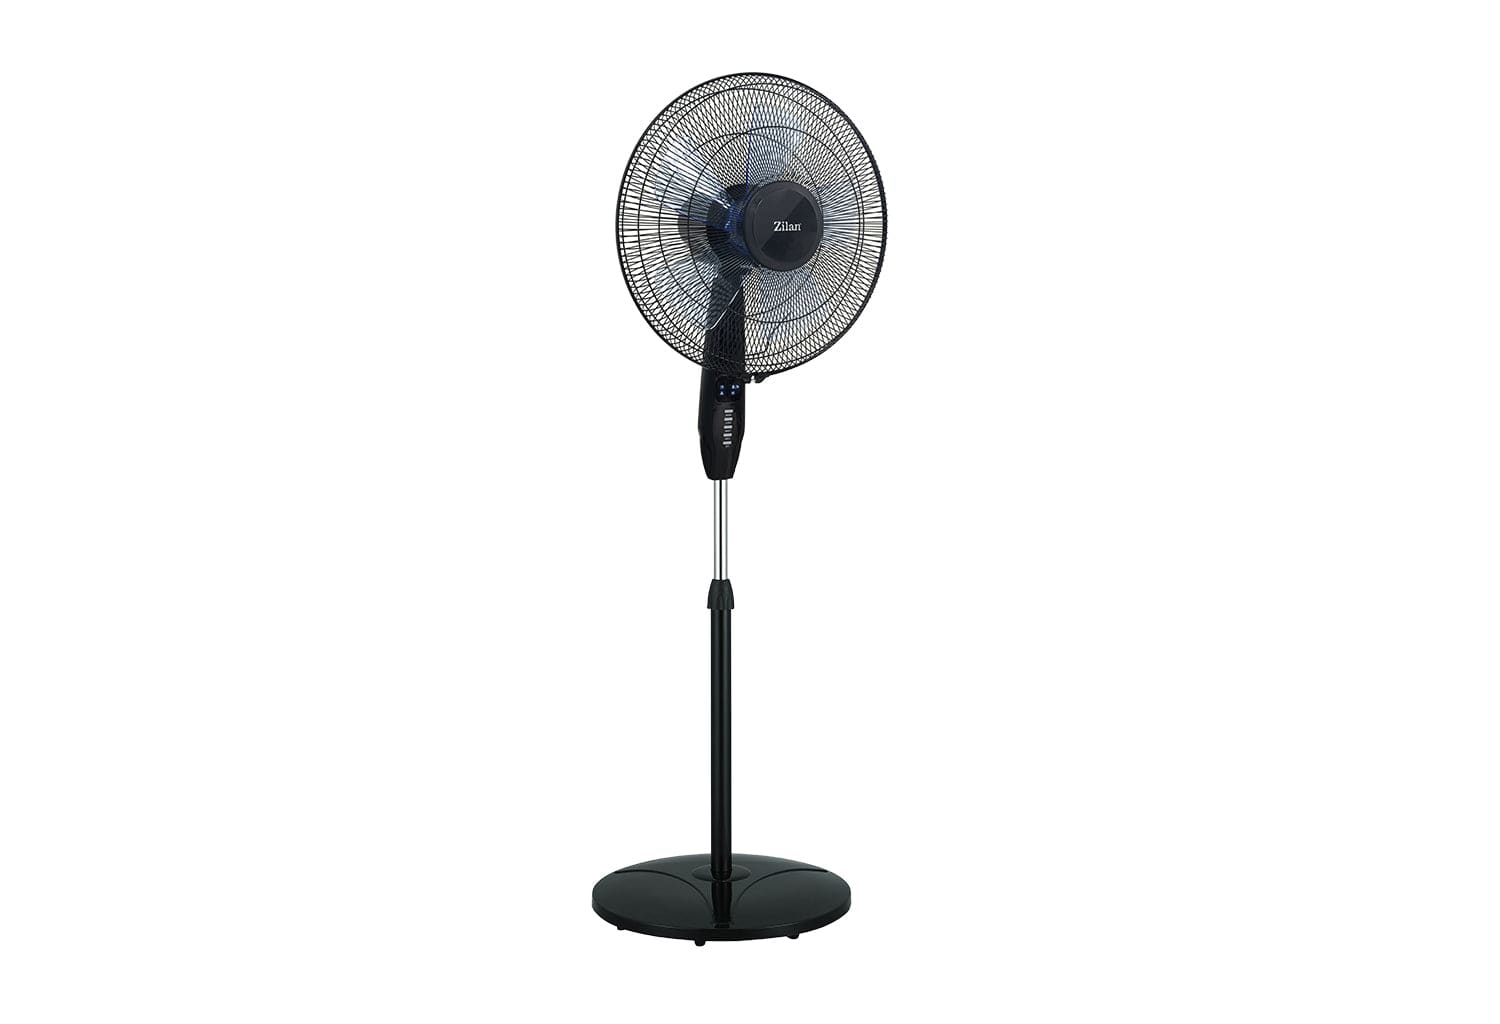 Buy Zilan 16" LED Stand Fan with Remote Control 60W - ZLN1178 | Supply Master Accra, Ghana Fan & Cooler Buy Tools hardware Building materials